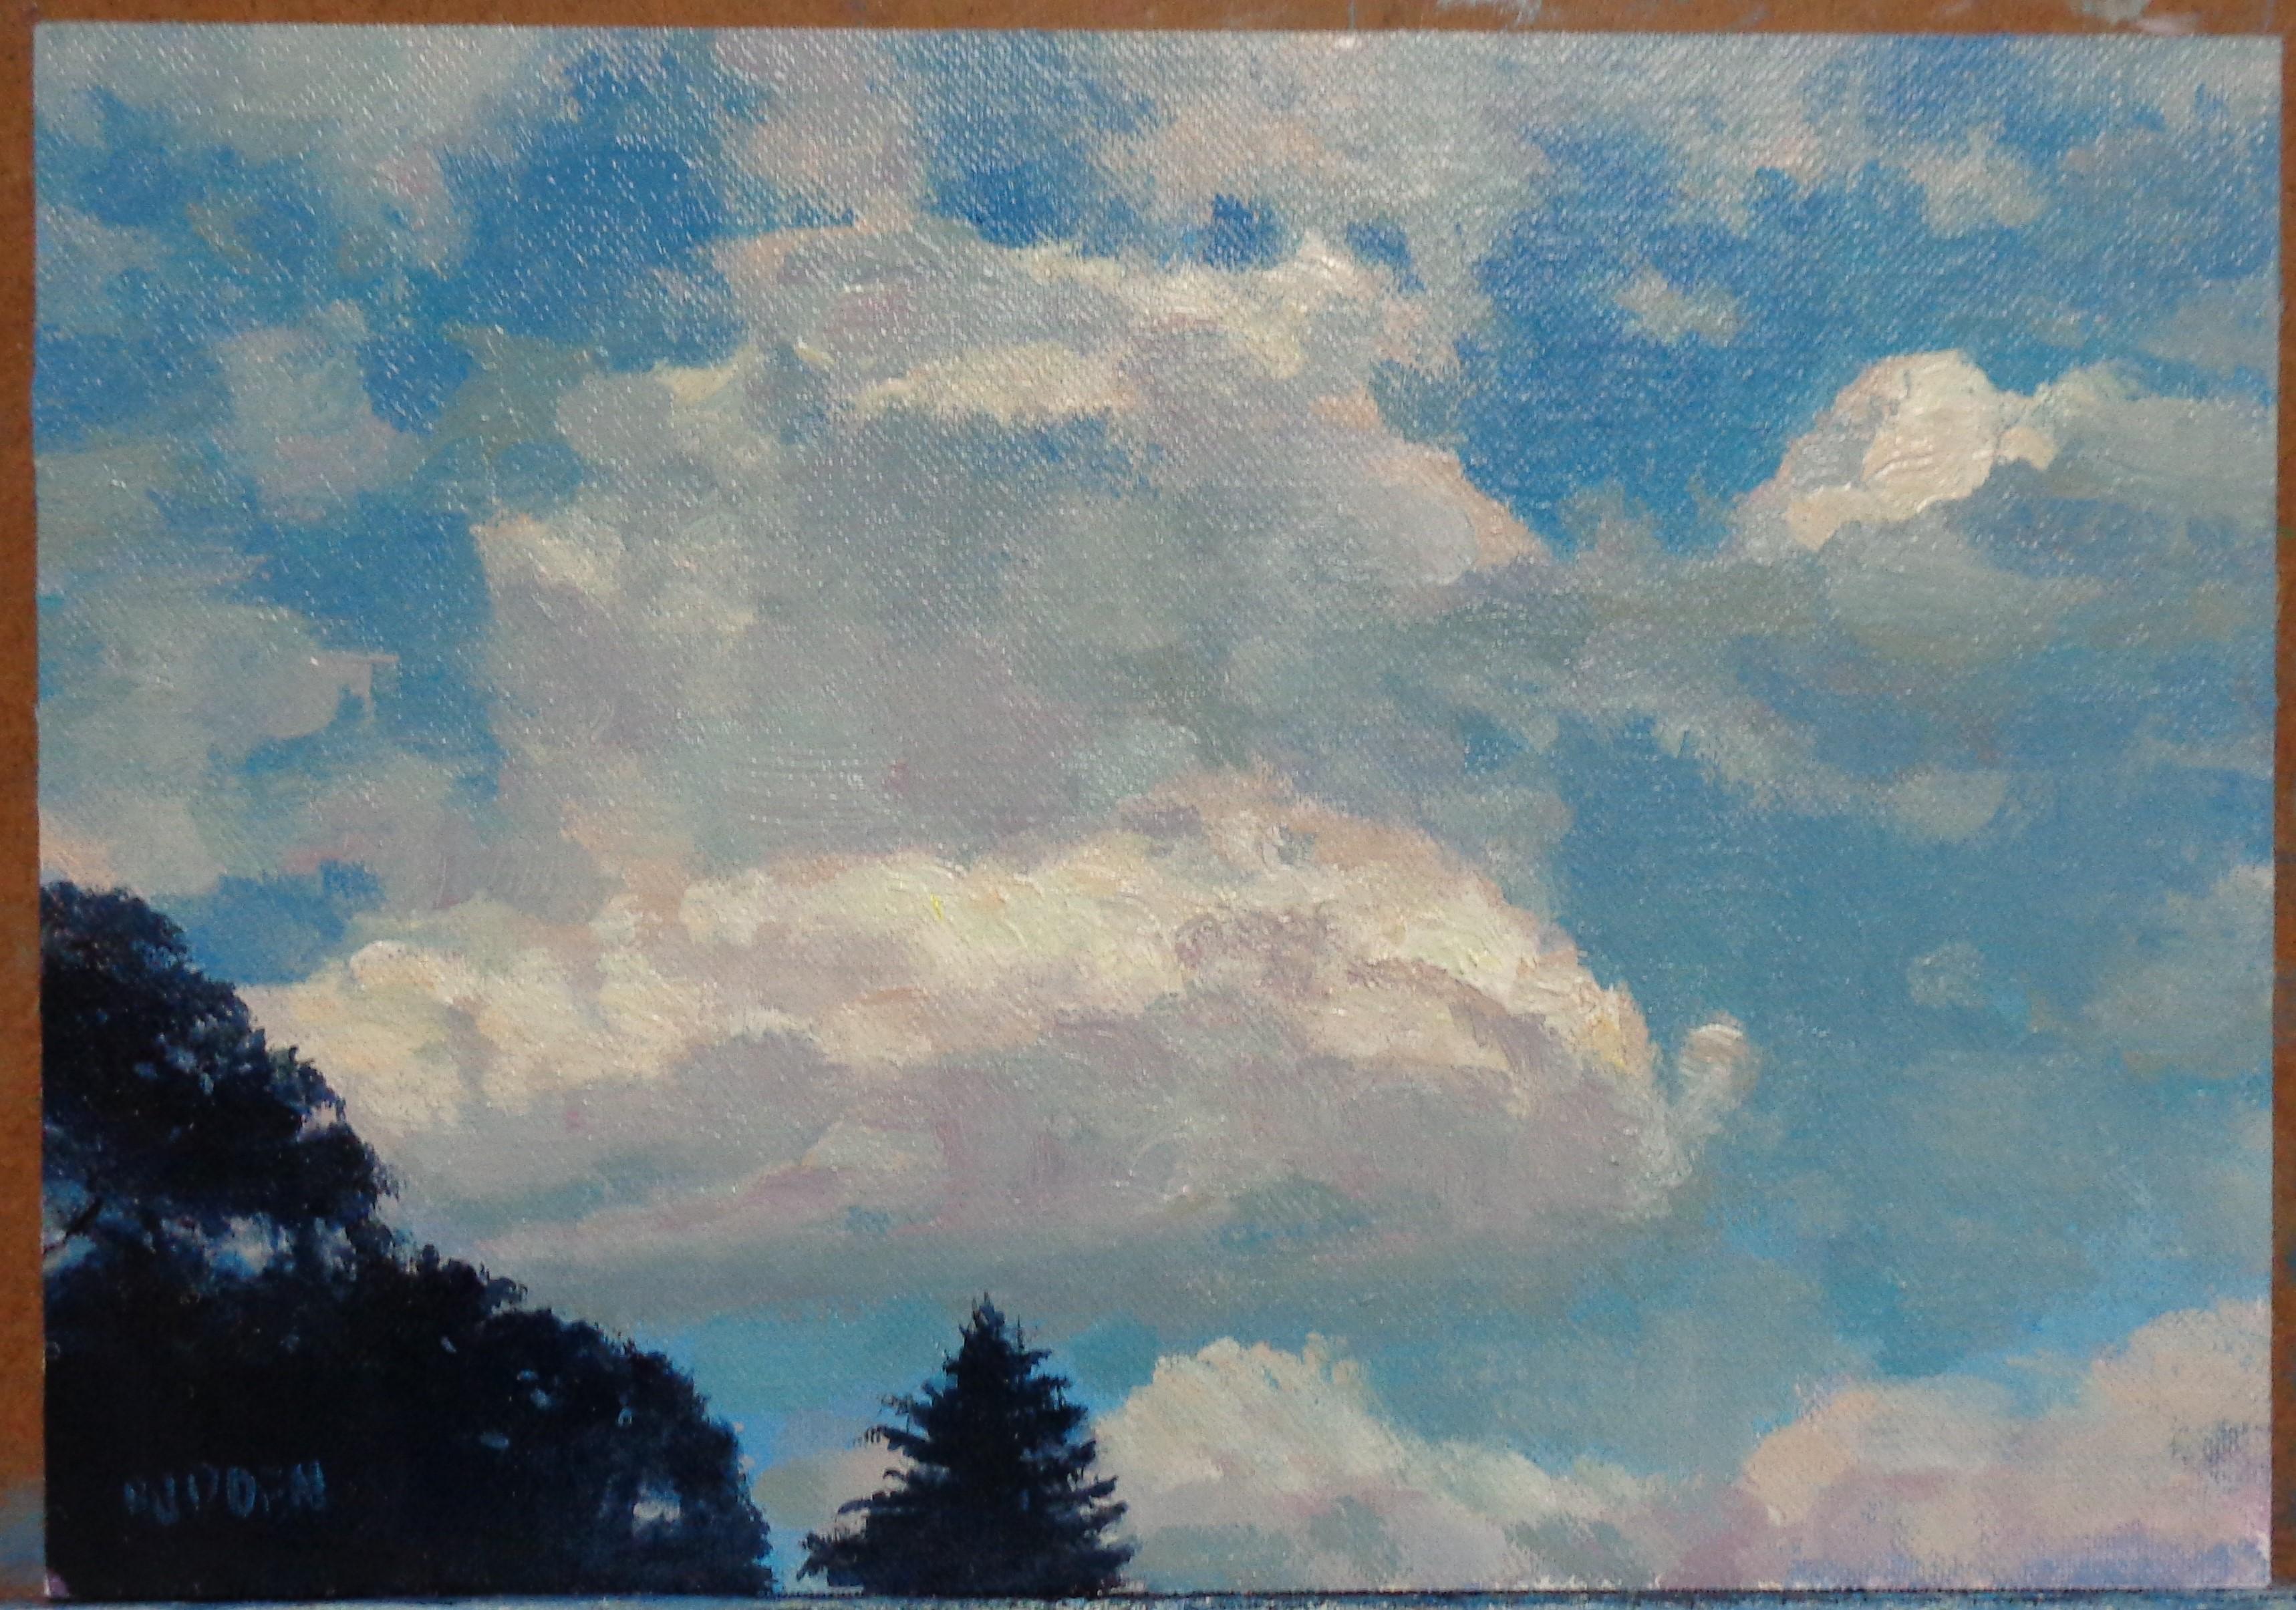 Sky Study
oil/panel
7 x 10 image size unframed, is an oil on panel  completed in the studio. The painting exudes the rich qualities of oil paint with bright strong color, a variety of lost and found edges, visible brush work and a concentration on a